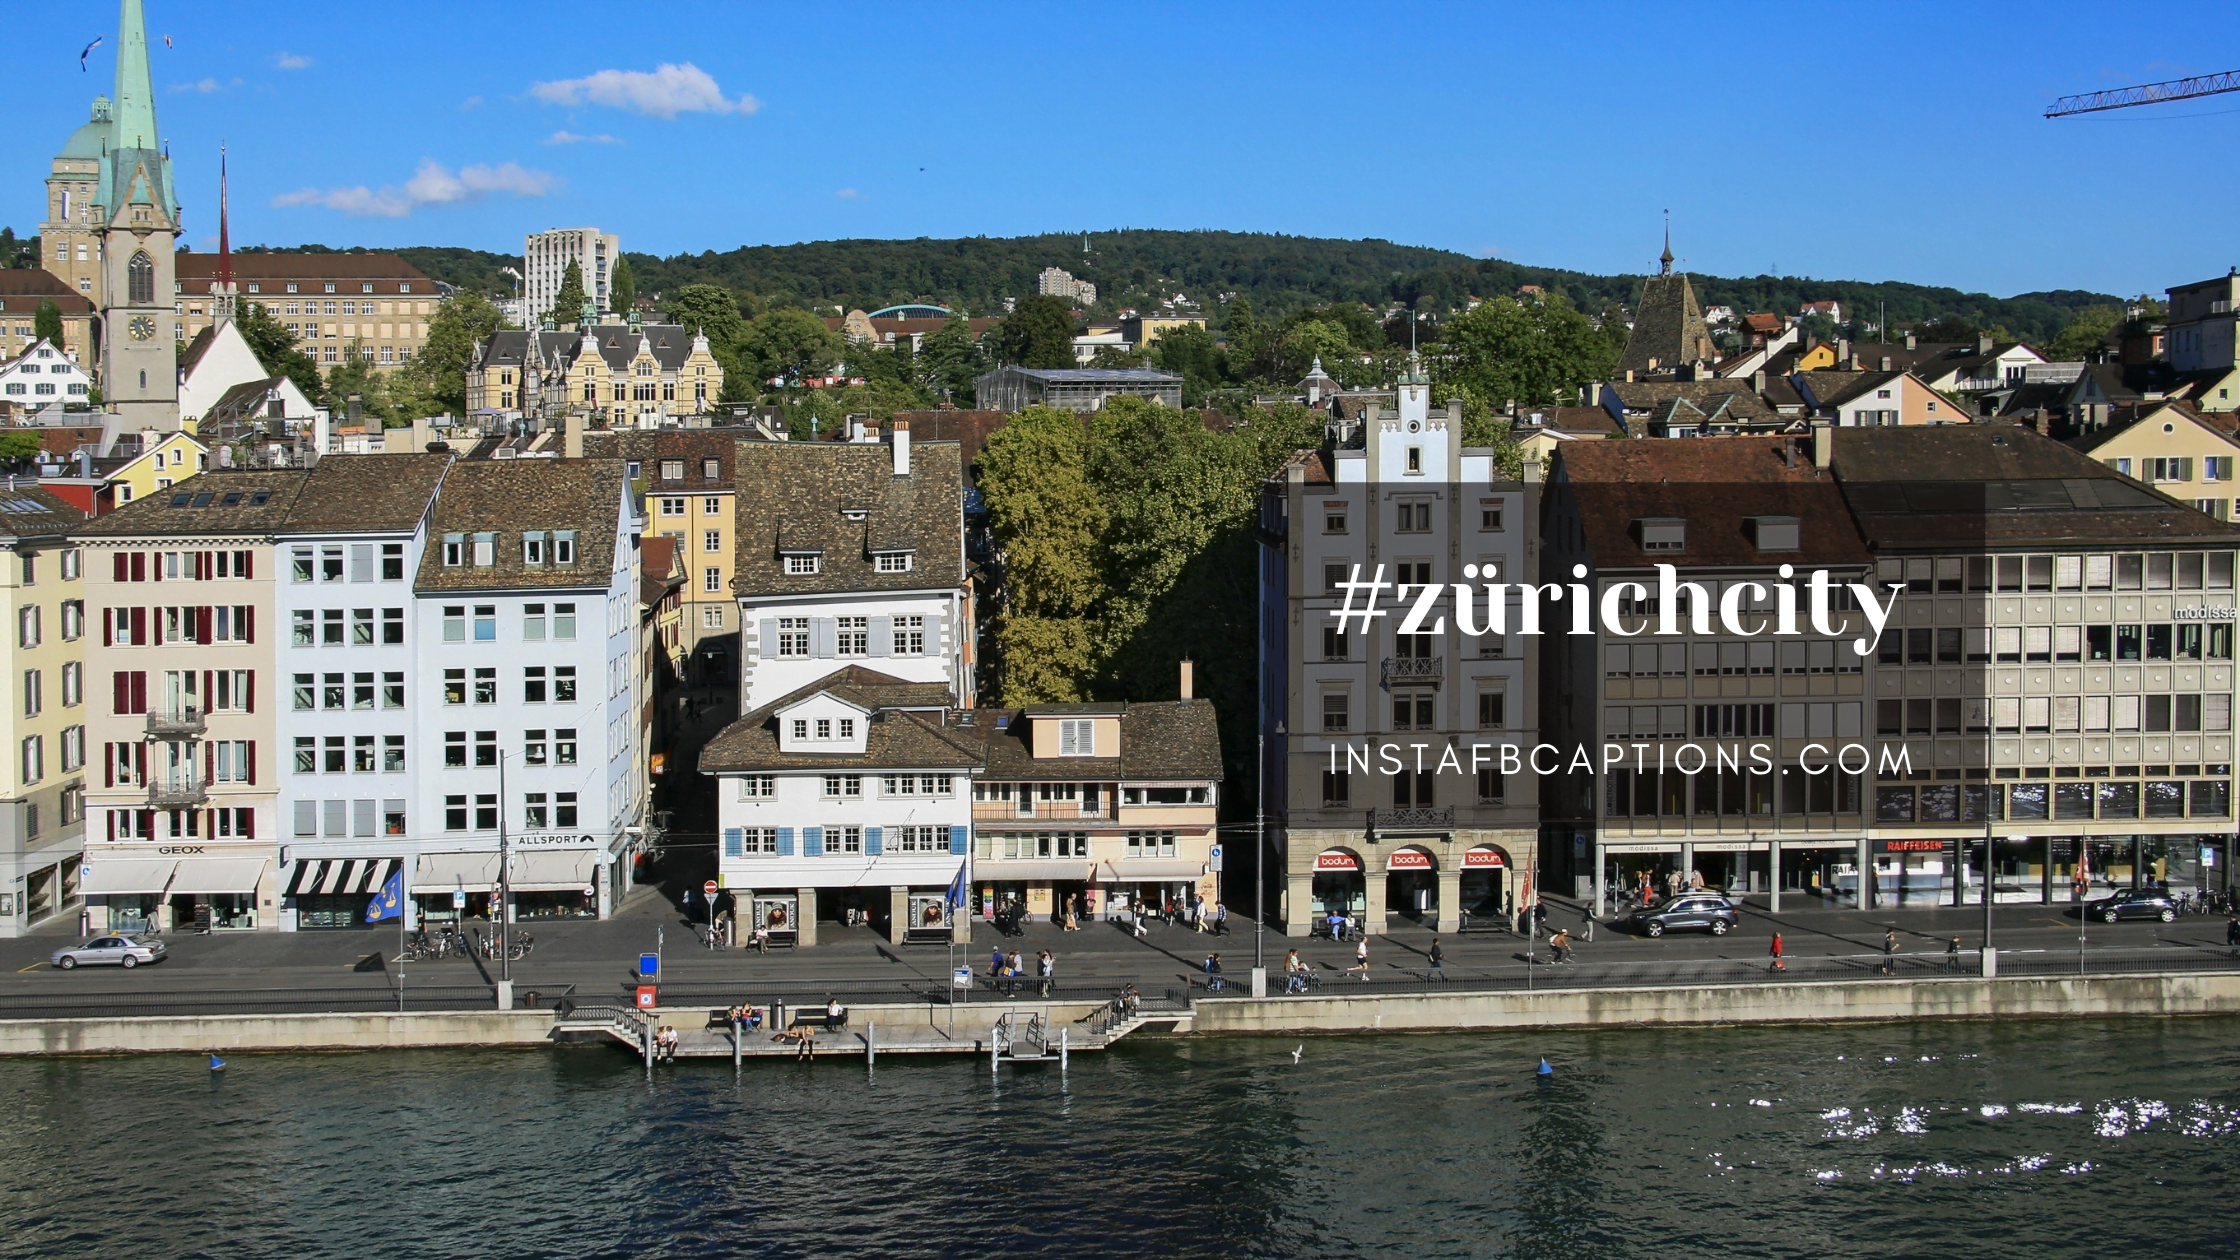 Trendy Zurich Hashtags  - Trendy Zurich Hashtags  - 90 Zurich Instagram Captions for Lake Pictures 2022